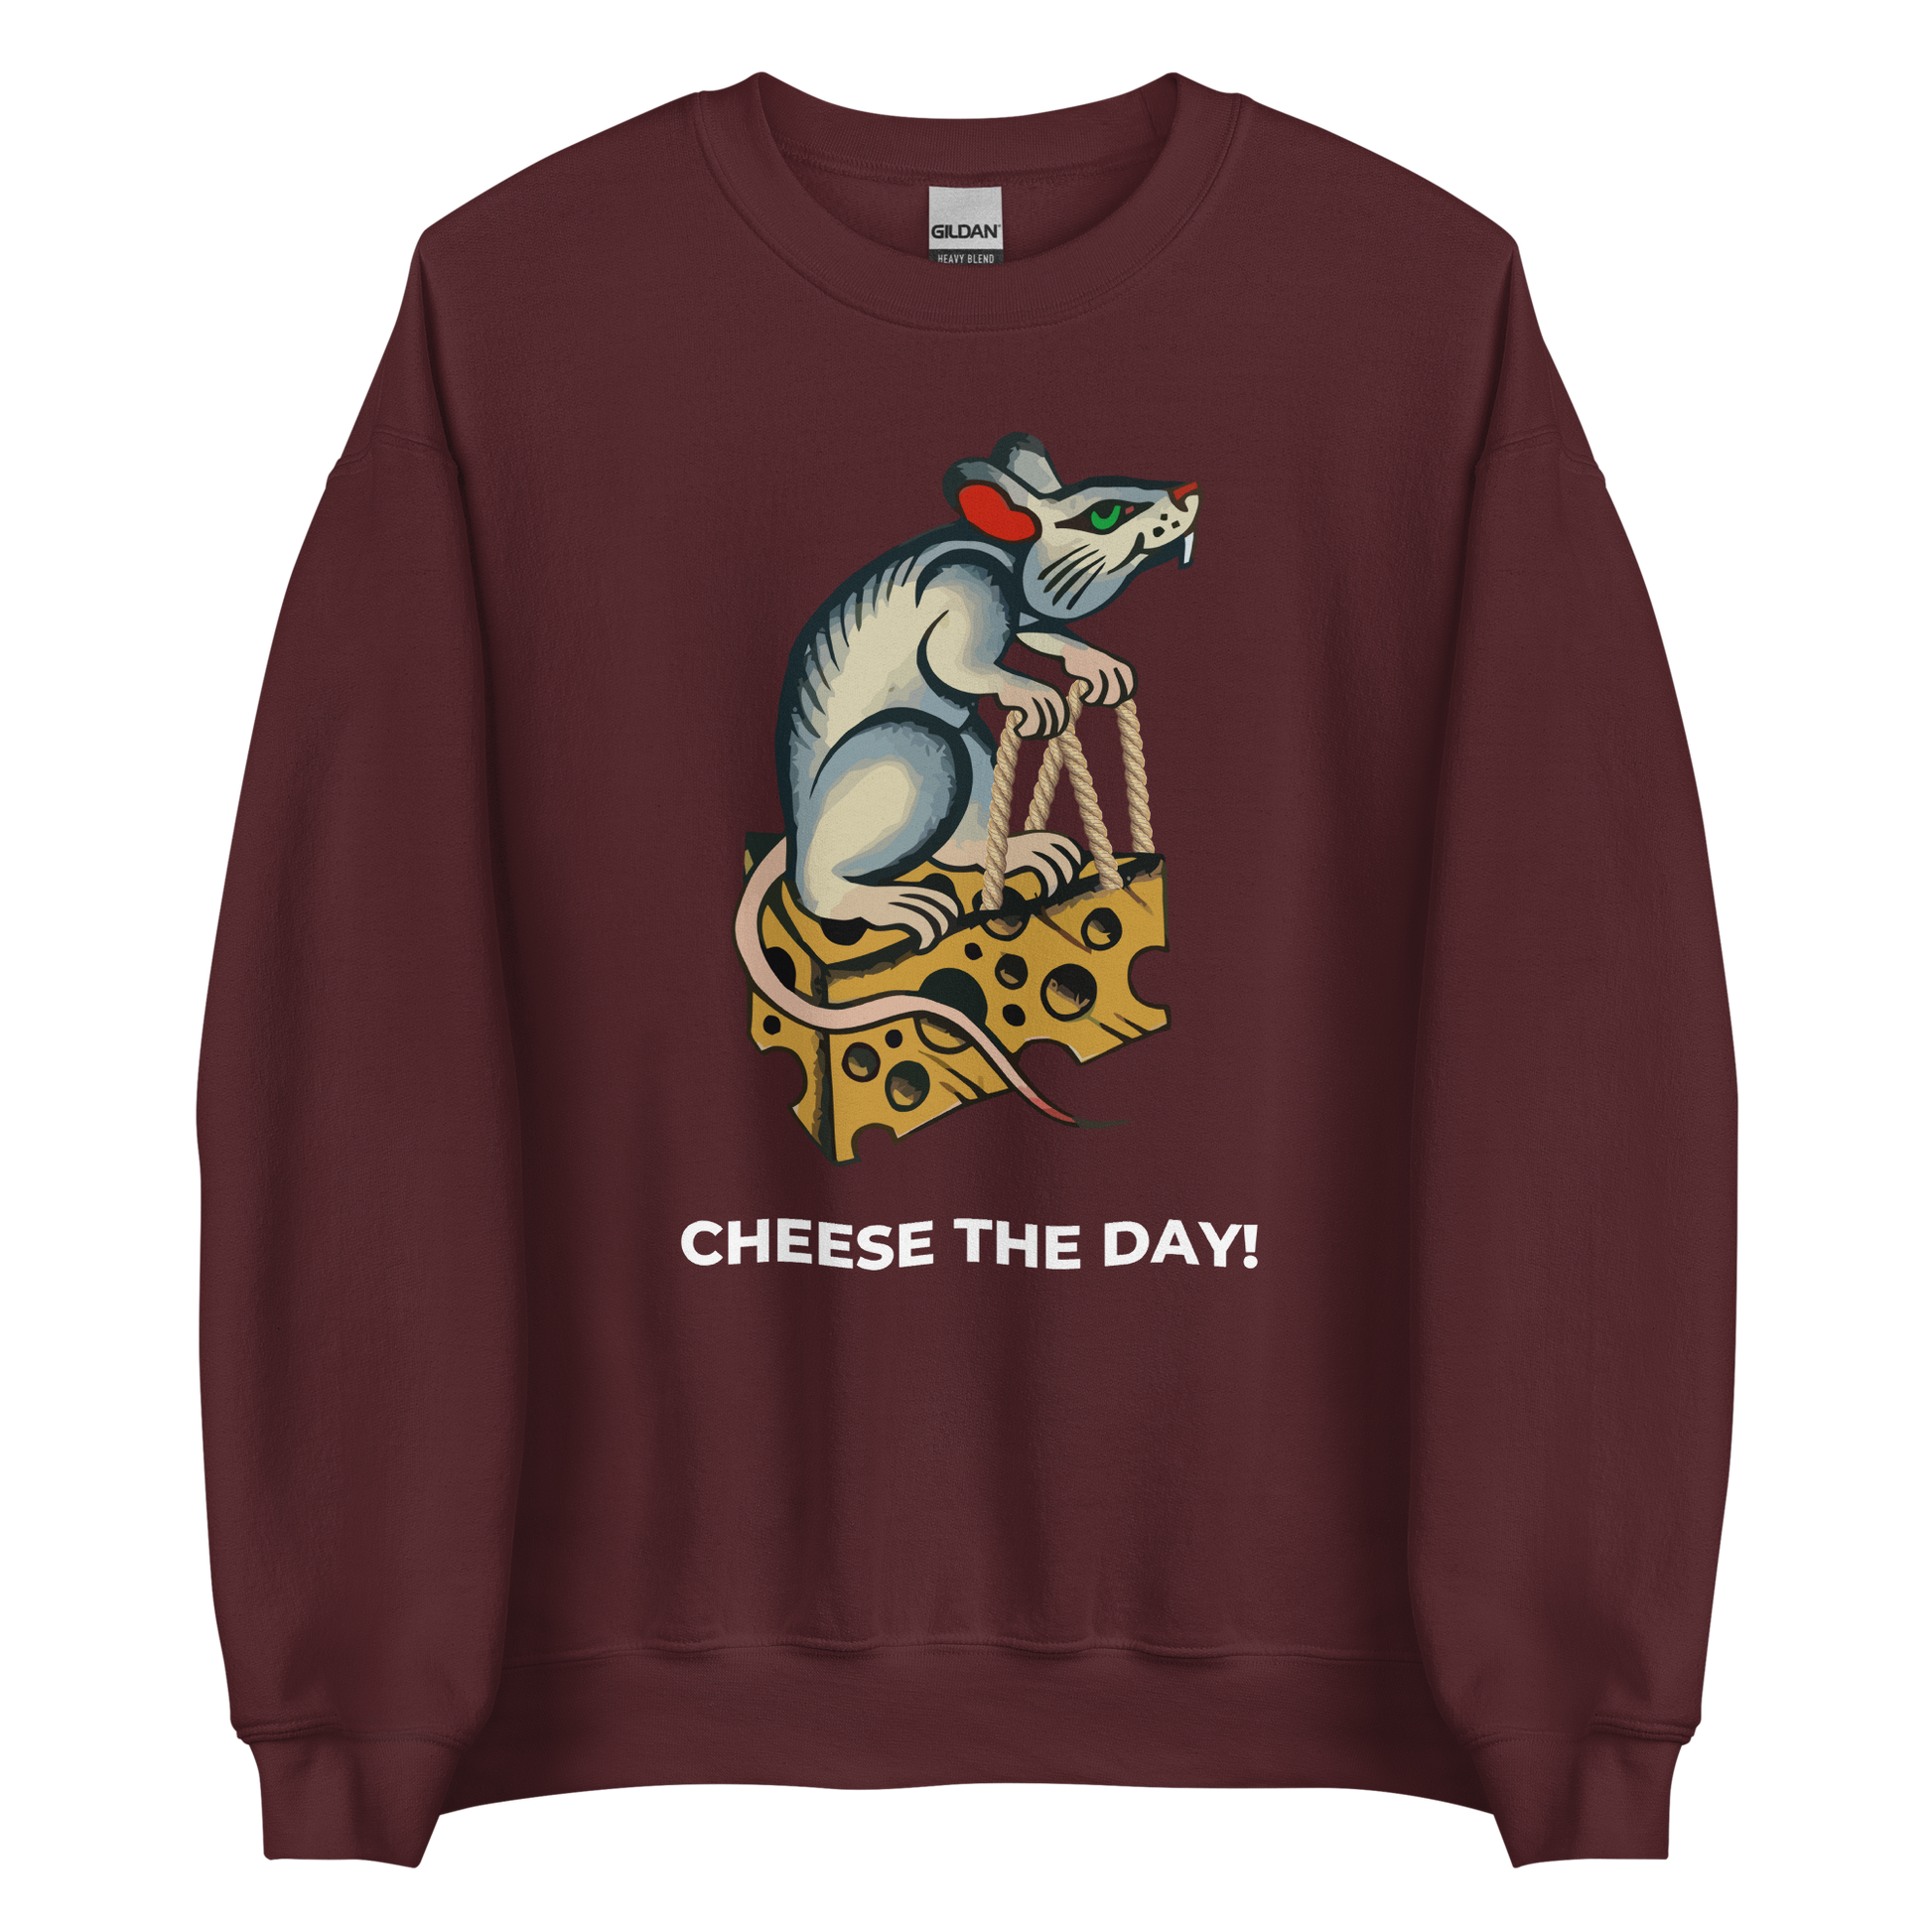 Maroon Rat Sweatshirt featuring a hilarious Cheese The Day graphic on the chest - Funny Graphic Rat Sweatshirts - Boozy Fox